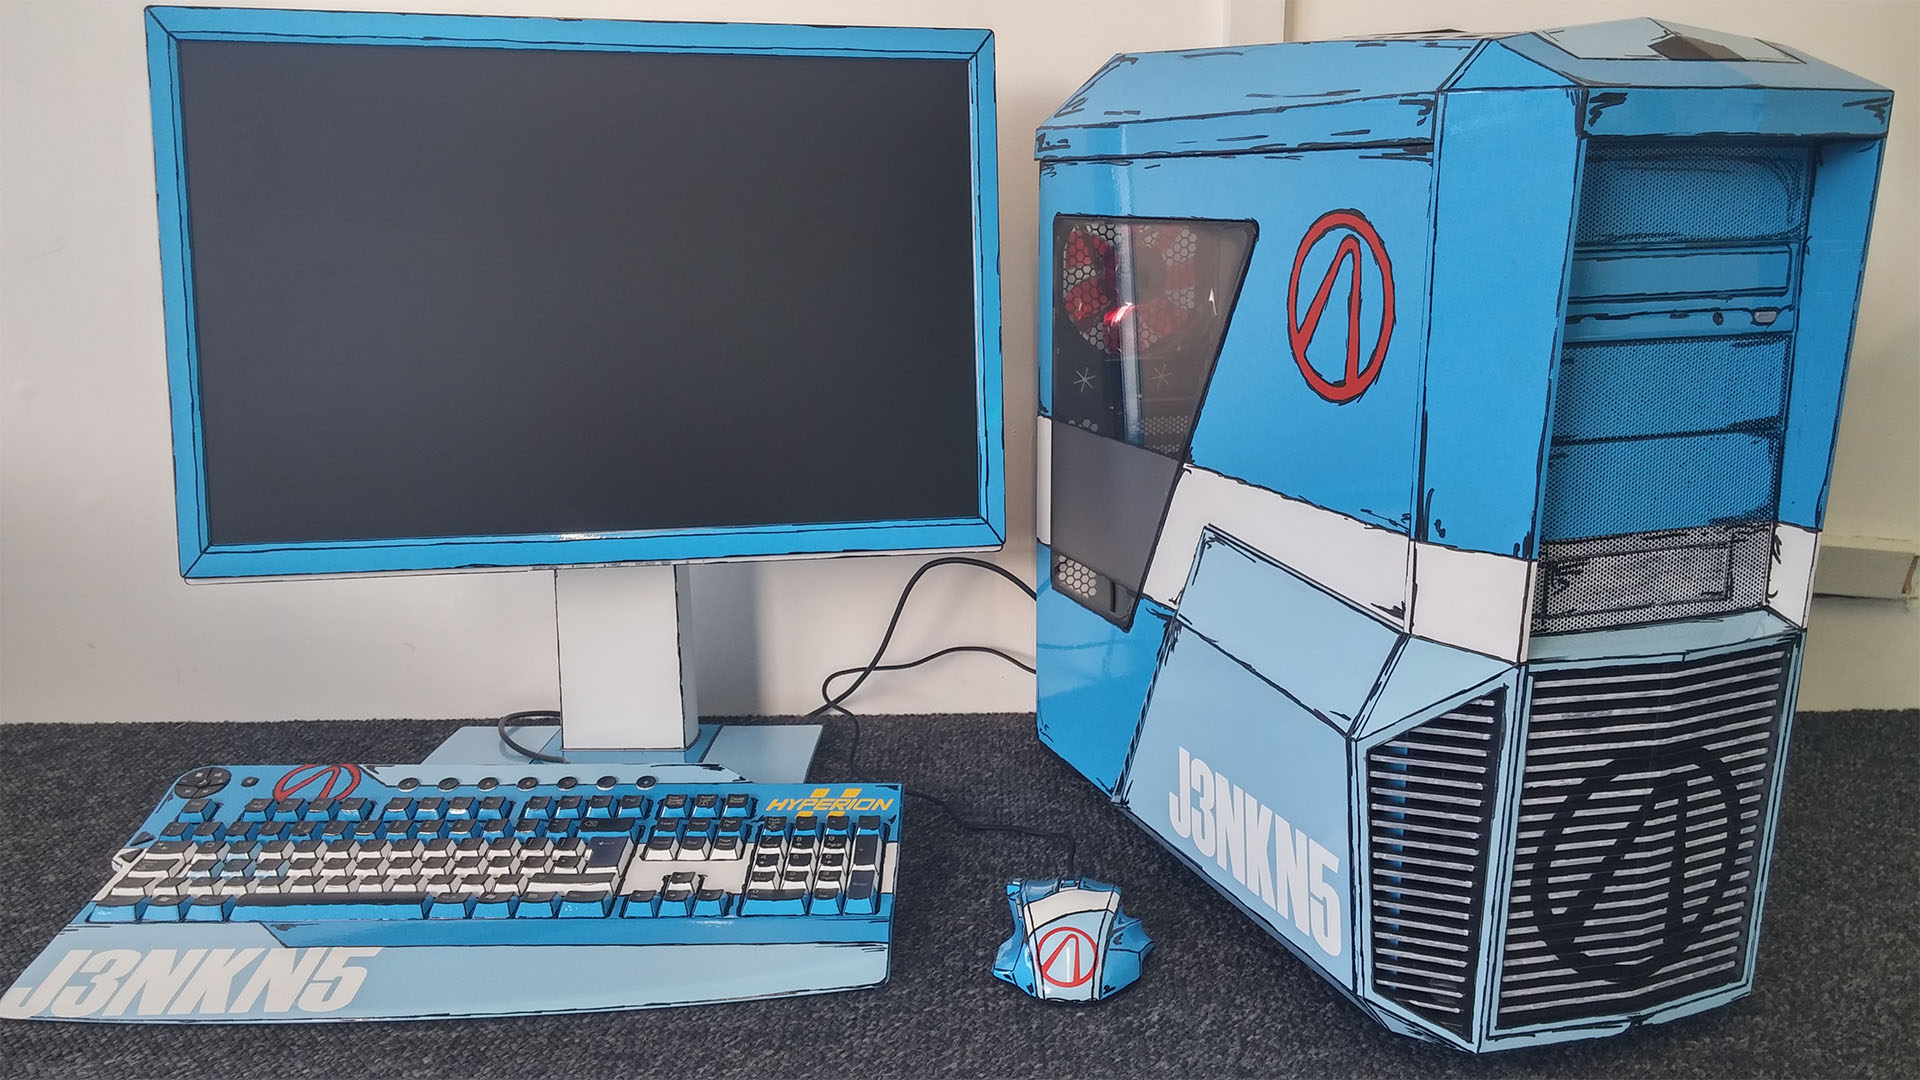 This cel-shaded Borderlands gaming PC is a work of art